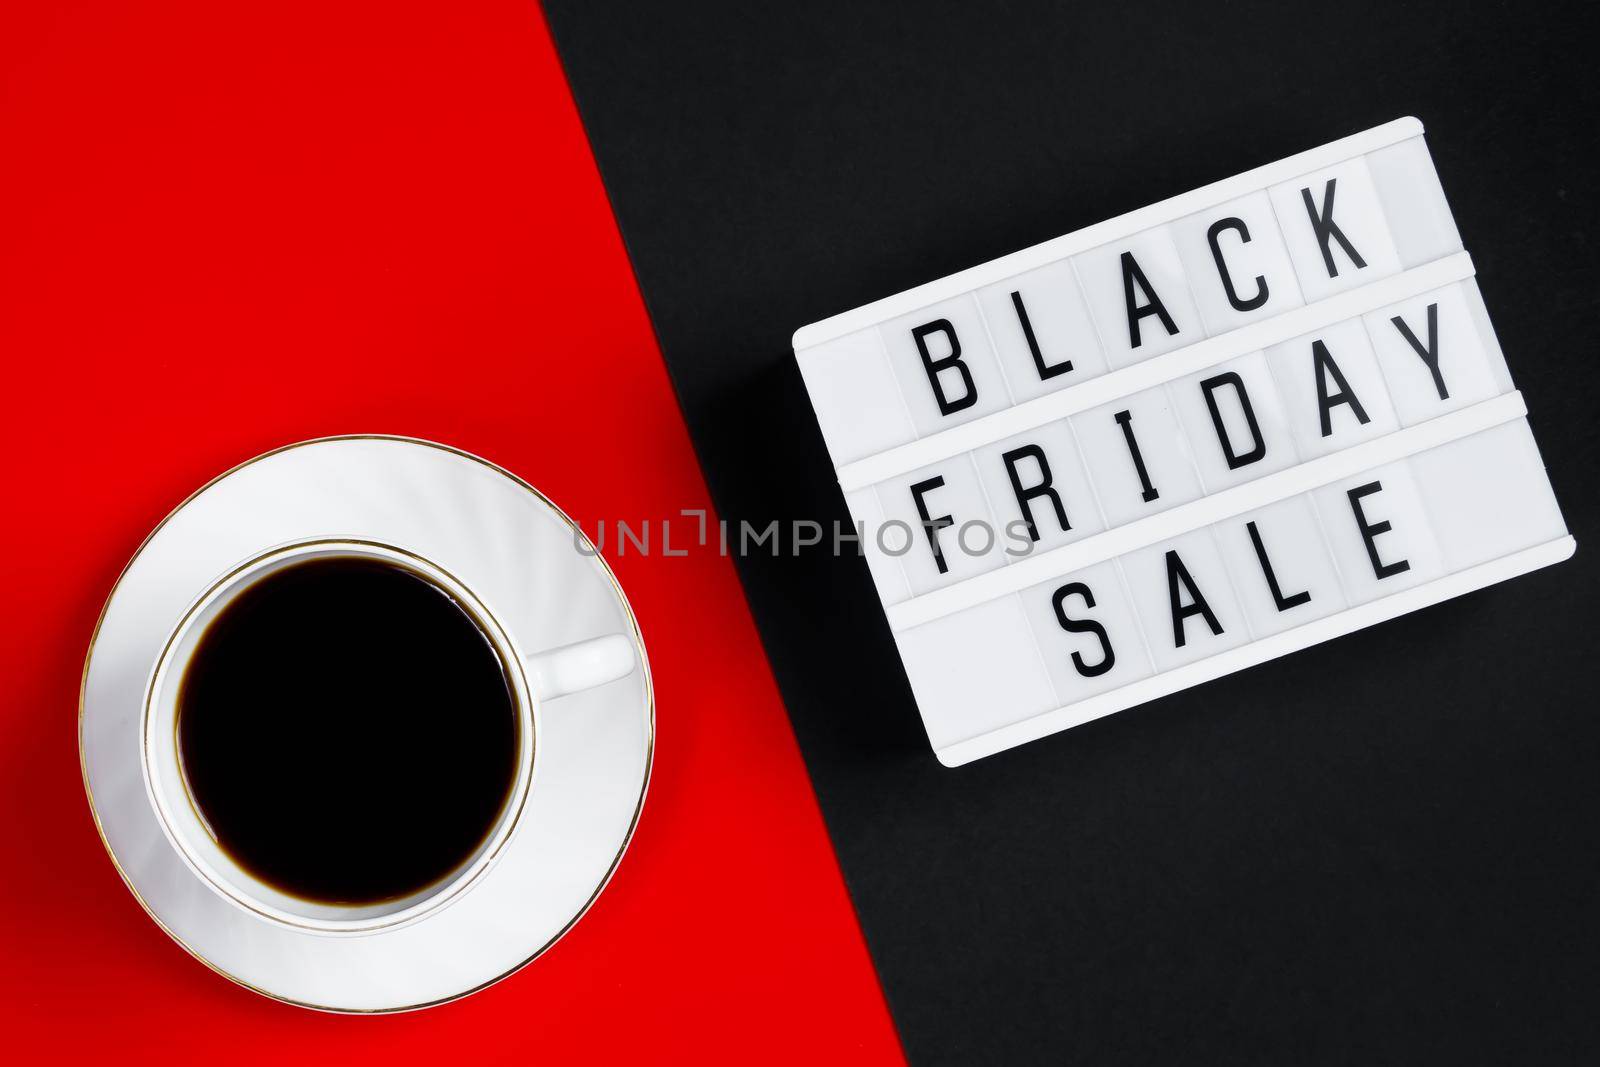 Black Friday sale concept. Cup of coffee on a red background. Banner for advertising.